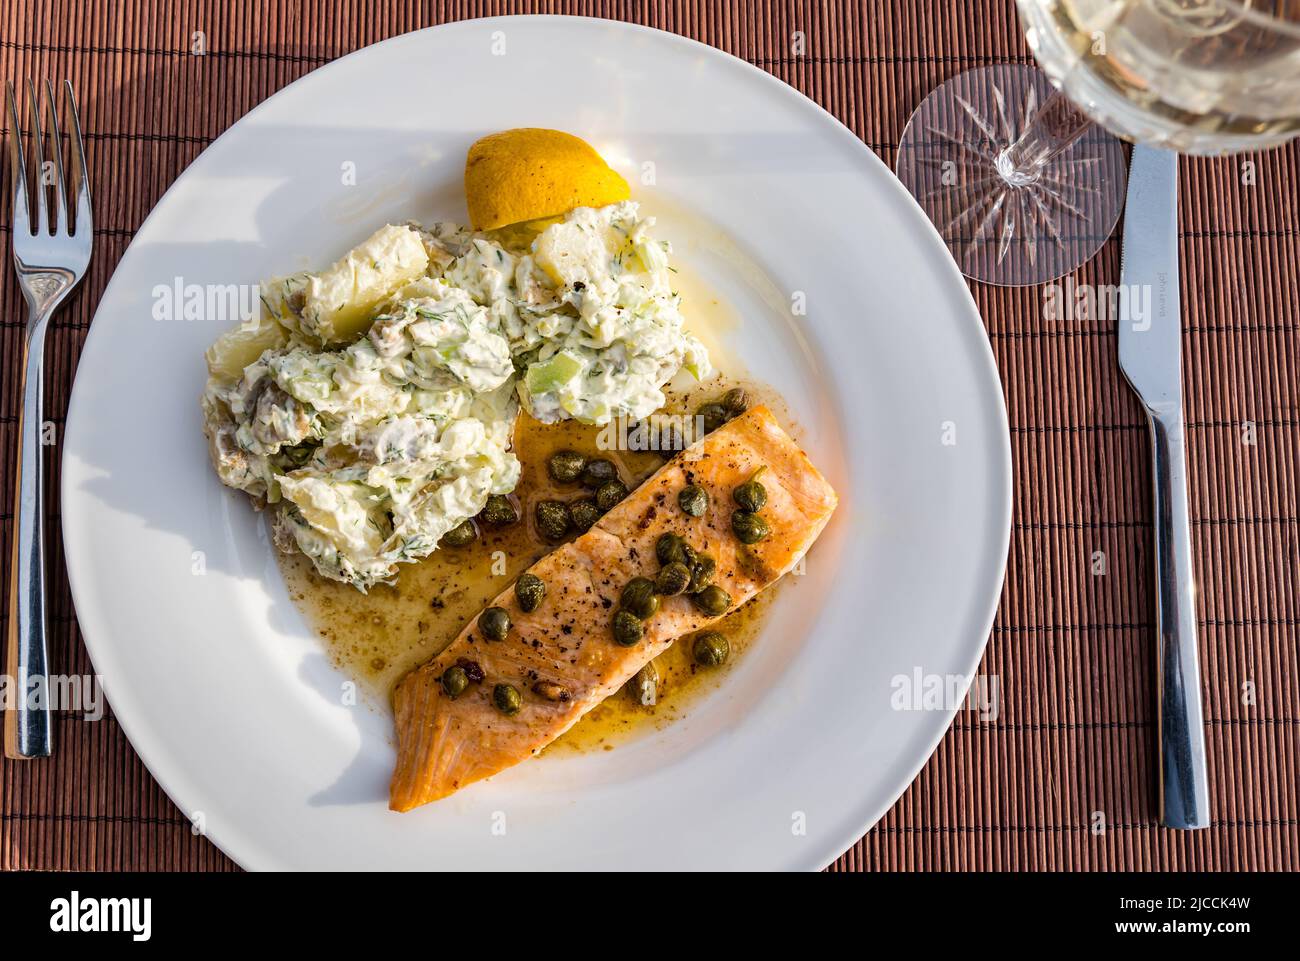 Dinner plate with slamon fillet & capers with potato salad & crystal wine glass for dinner on outdoor patio table in sunshine Stock Photo